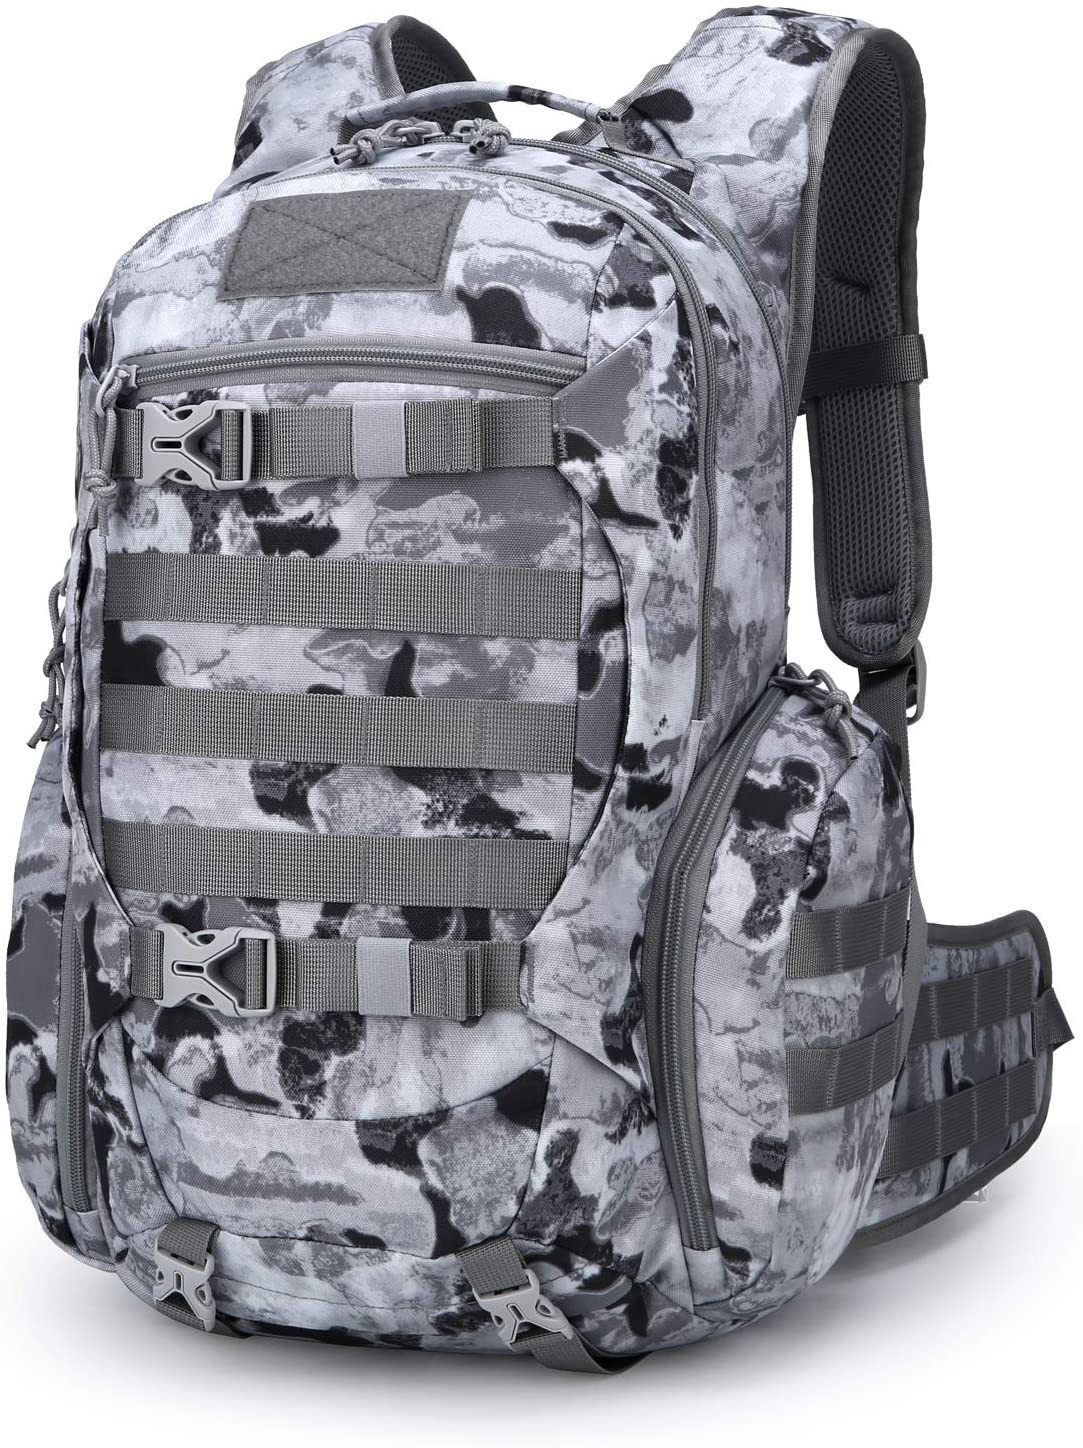 Survival Army Bag Black Military Tactical Backpack